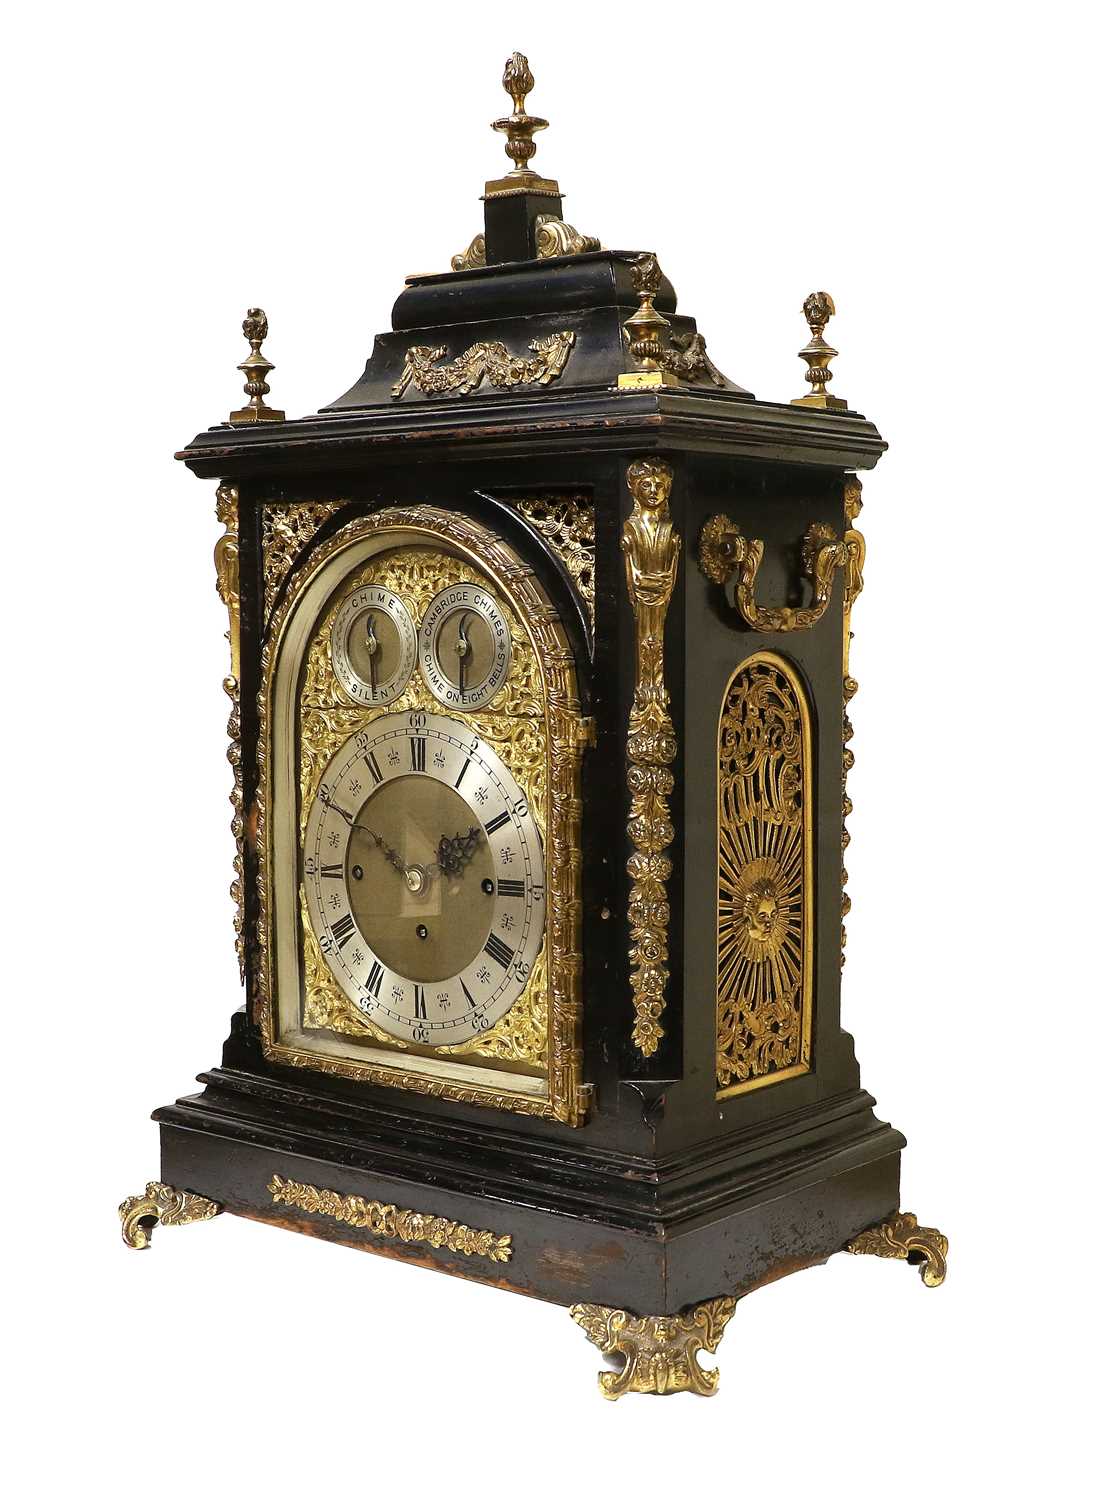 An Ebonised Chiming Table Clock, circa 1890, inverted bell top case with urn shaped finials, side